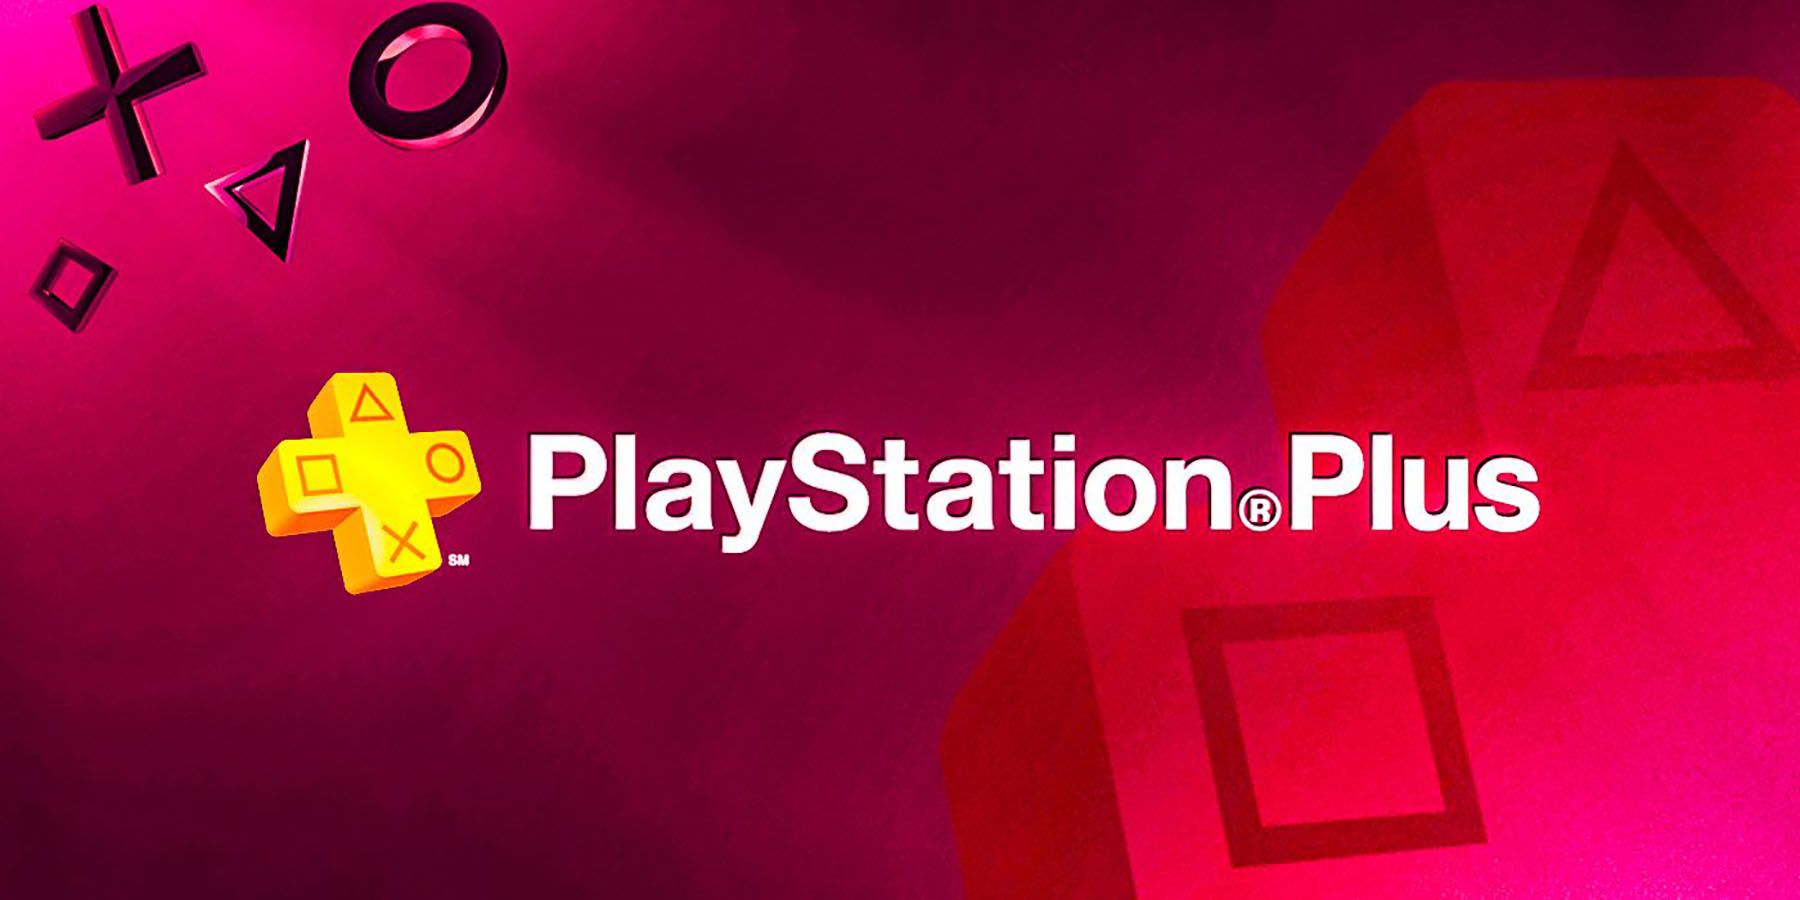 PS Plus Games for February 2022 — here's what you can play for free